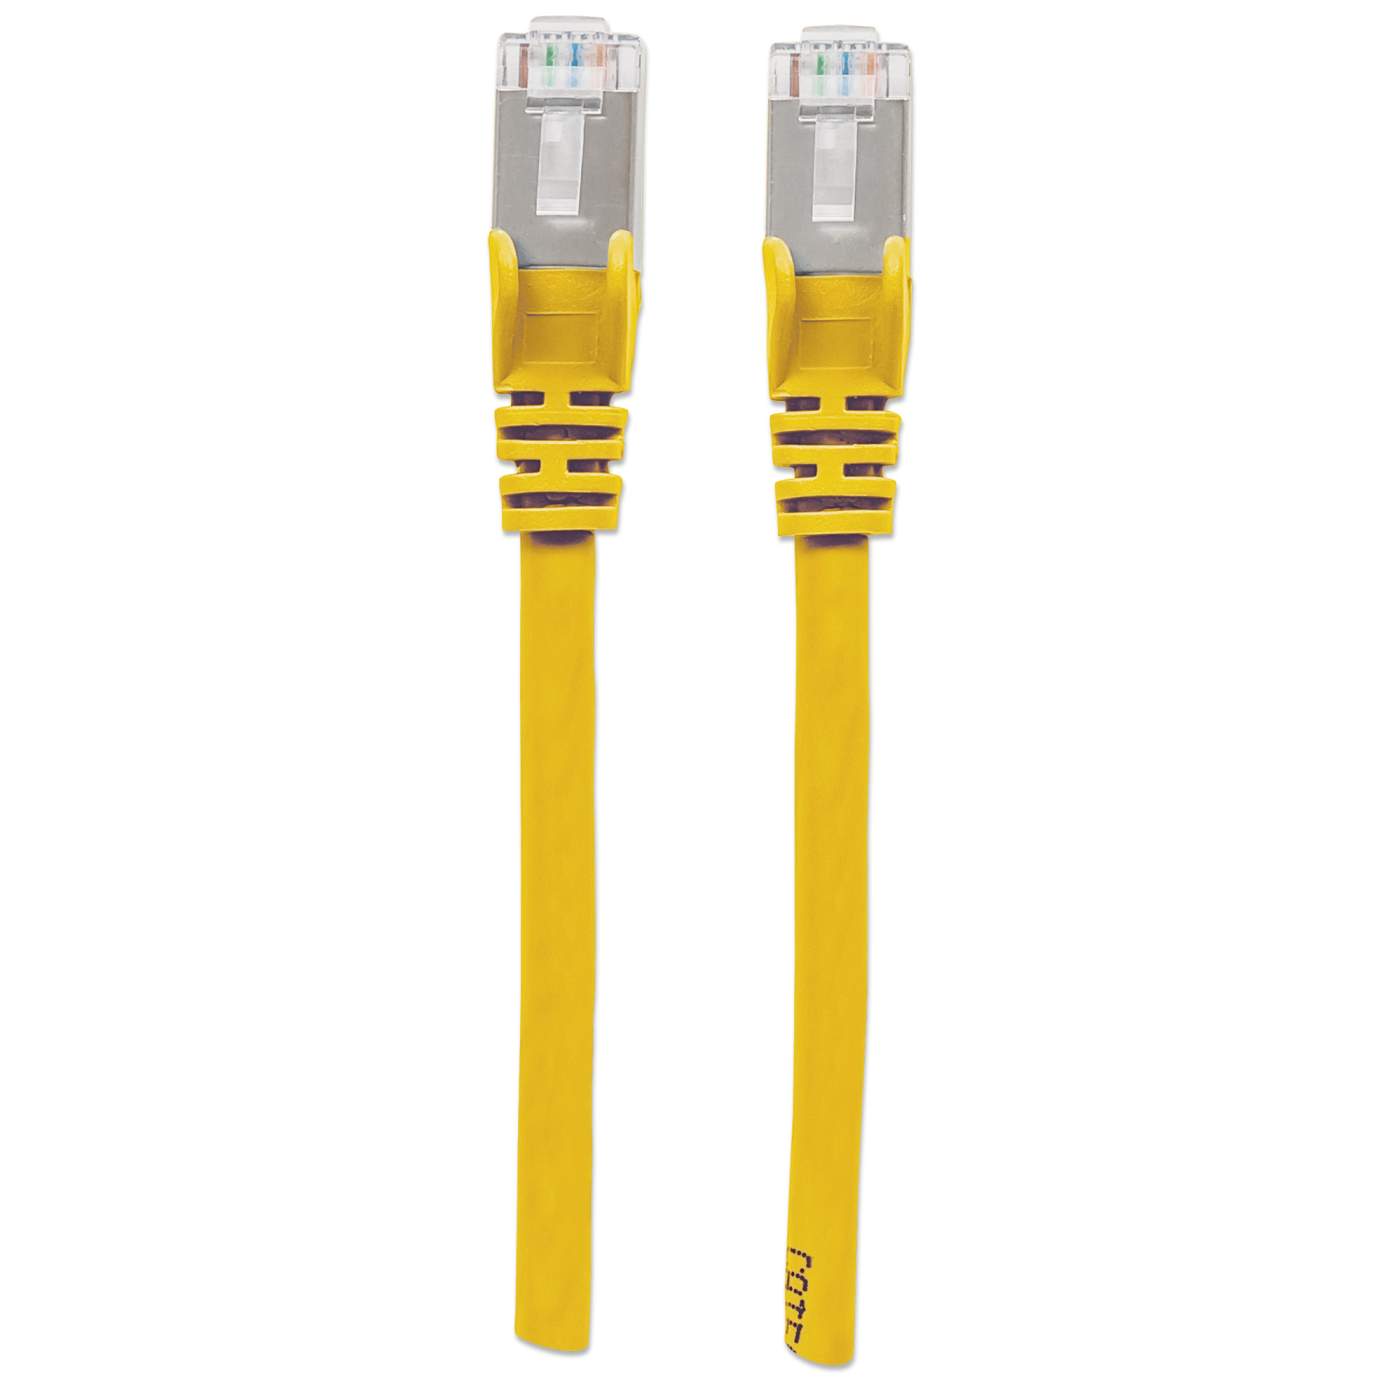 Cat6a S/FTP Network Patch Cable, 14 ft., Yellow Image 5